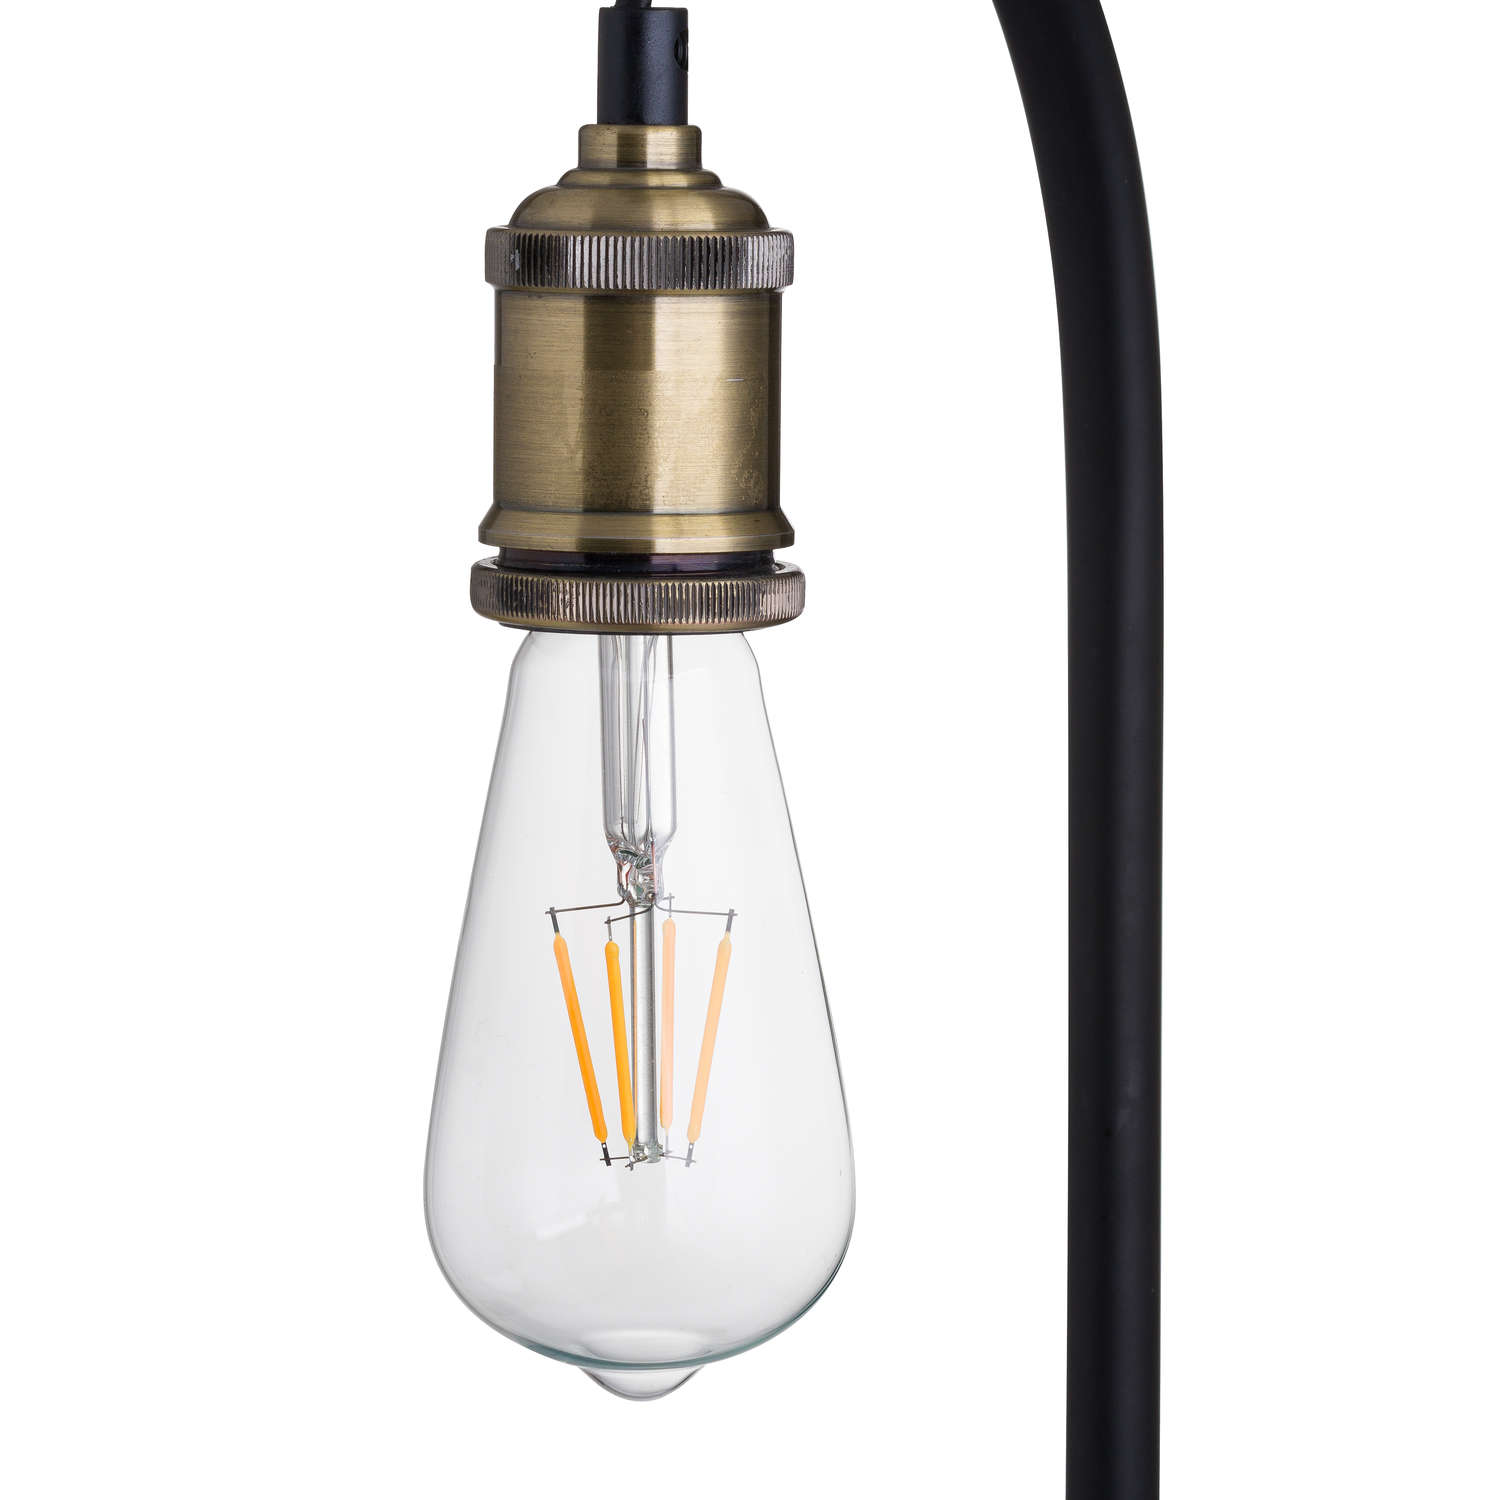 Industrial Black And Brass Floor Lamp Inc Bulb - Image 2